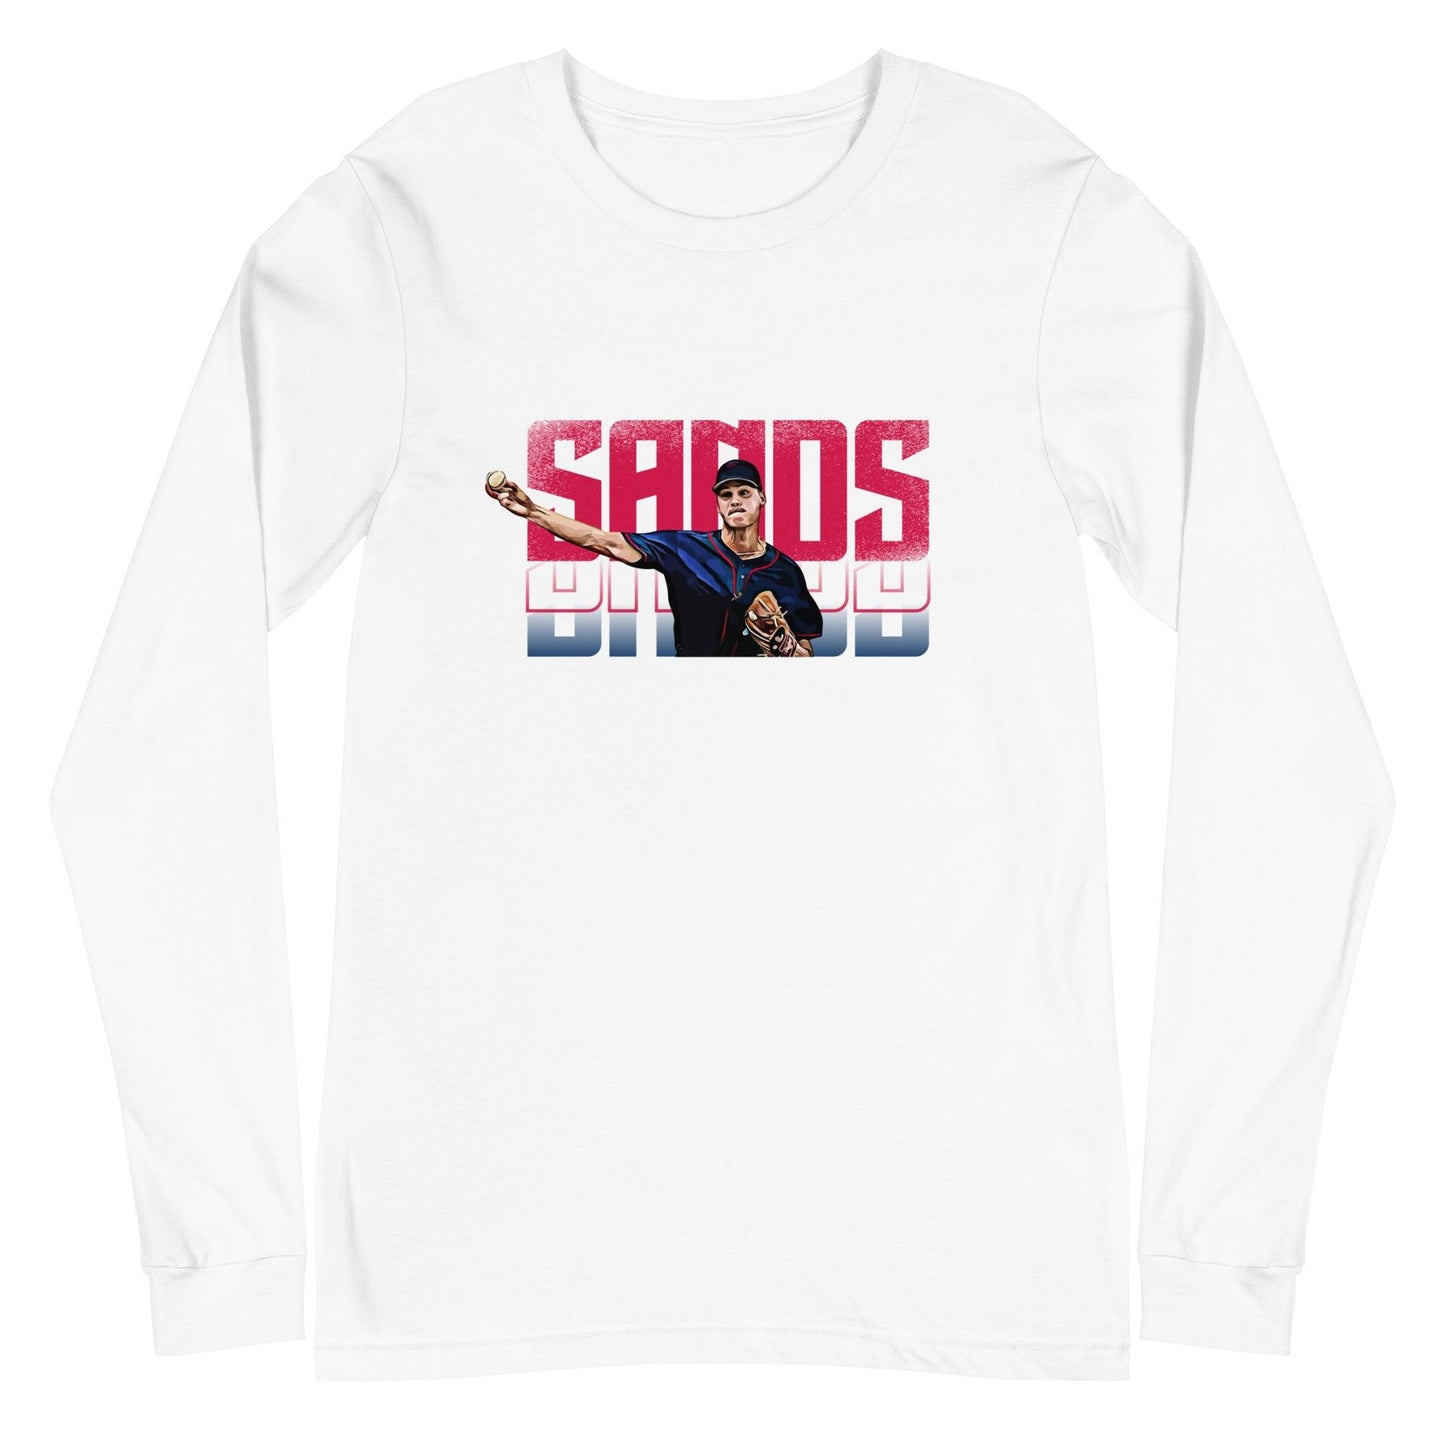 Cole sands “Essential” Long Sleeve Tee - Fan Arch